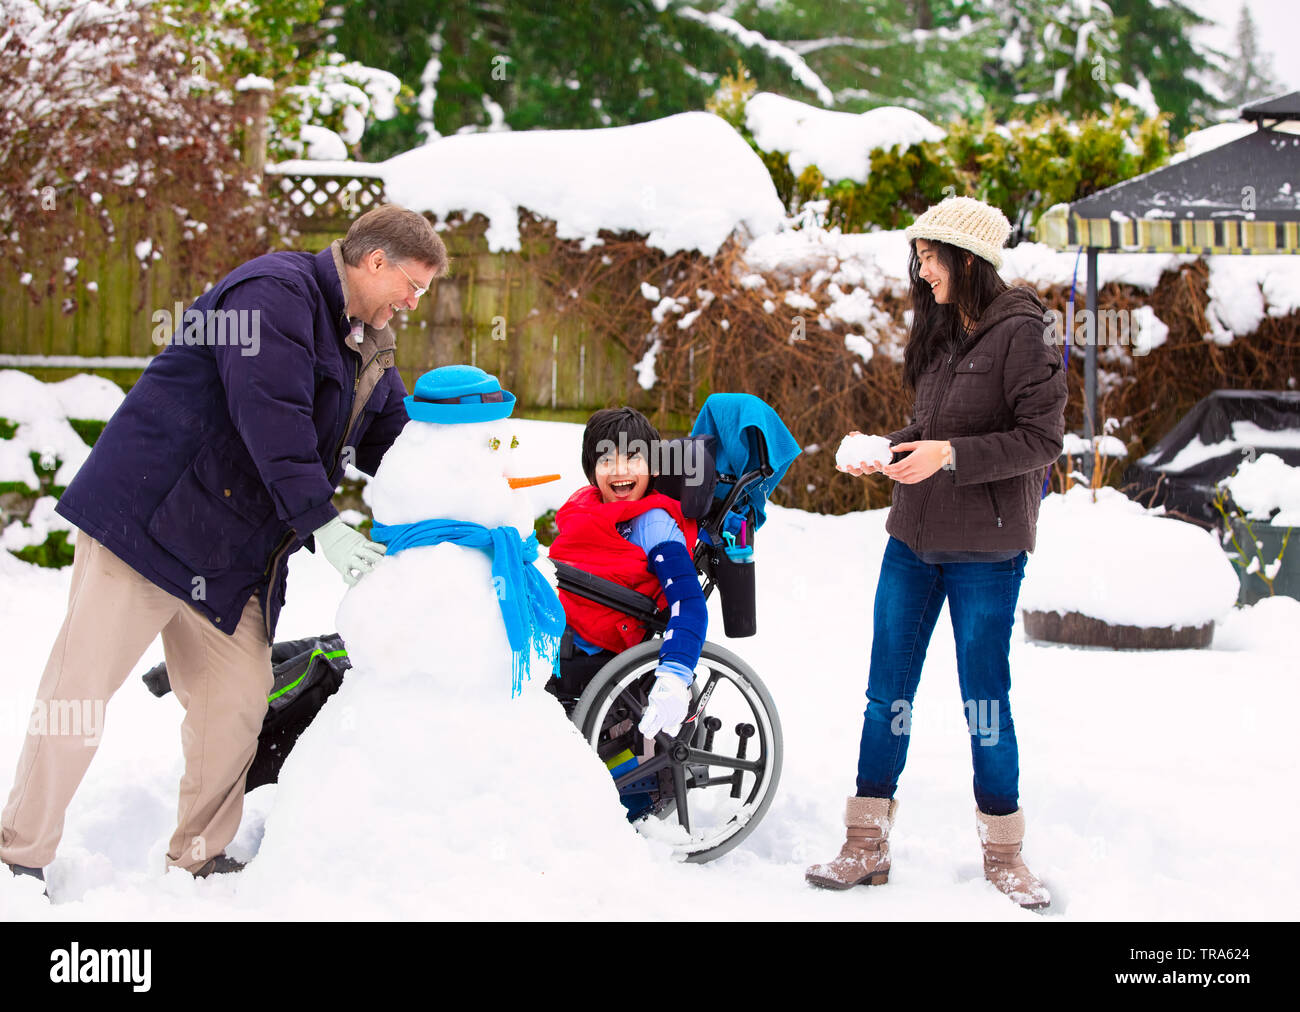 Disabled biracial young boy in wheelchair building a snowman with father and sister during winter after heavy snowfall Stock Photo